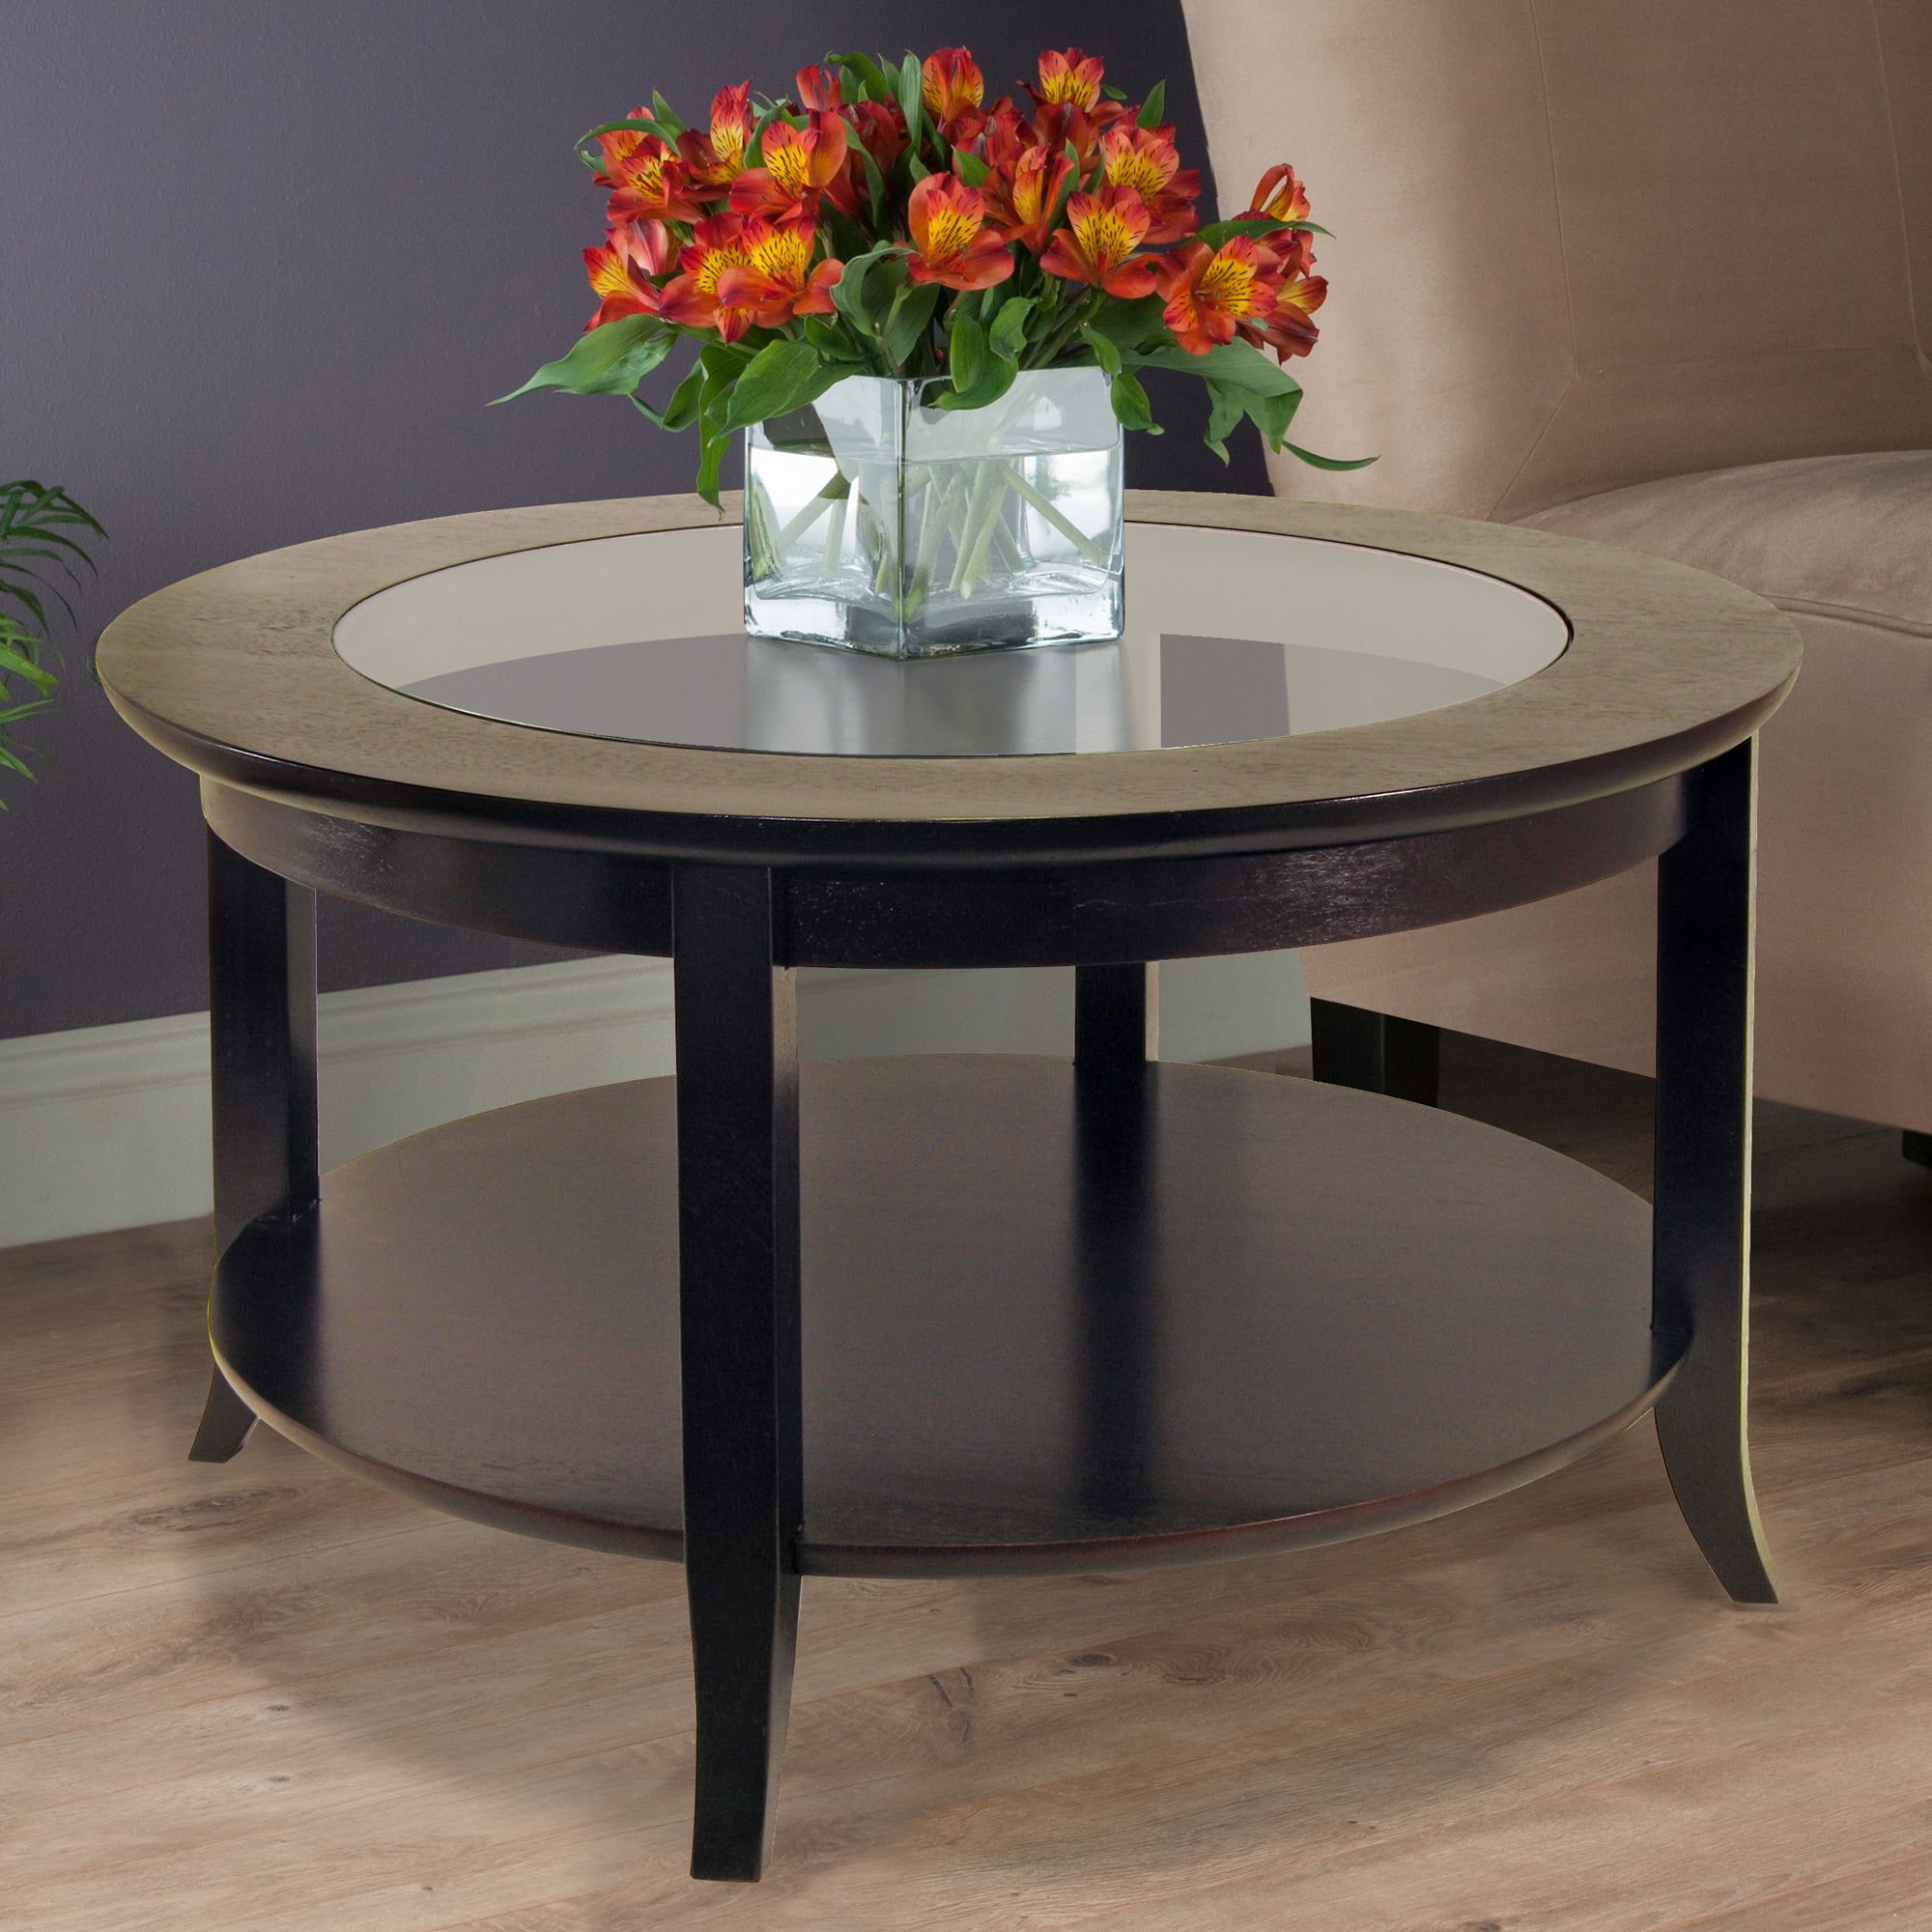 Coffee Tables With Round Wooden Tops Pertaining To Favorite Winsome Wood Genoa Round Coffee Table With Glass Top, Espresso Finish (View 11 of 15)